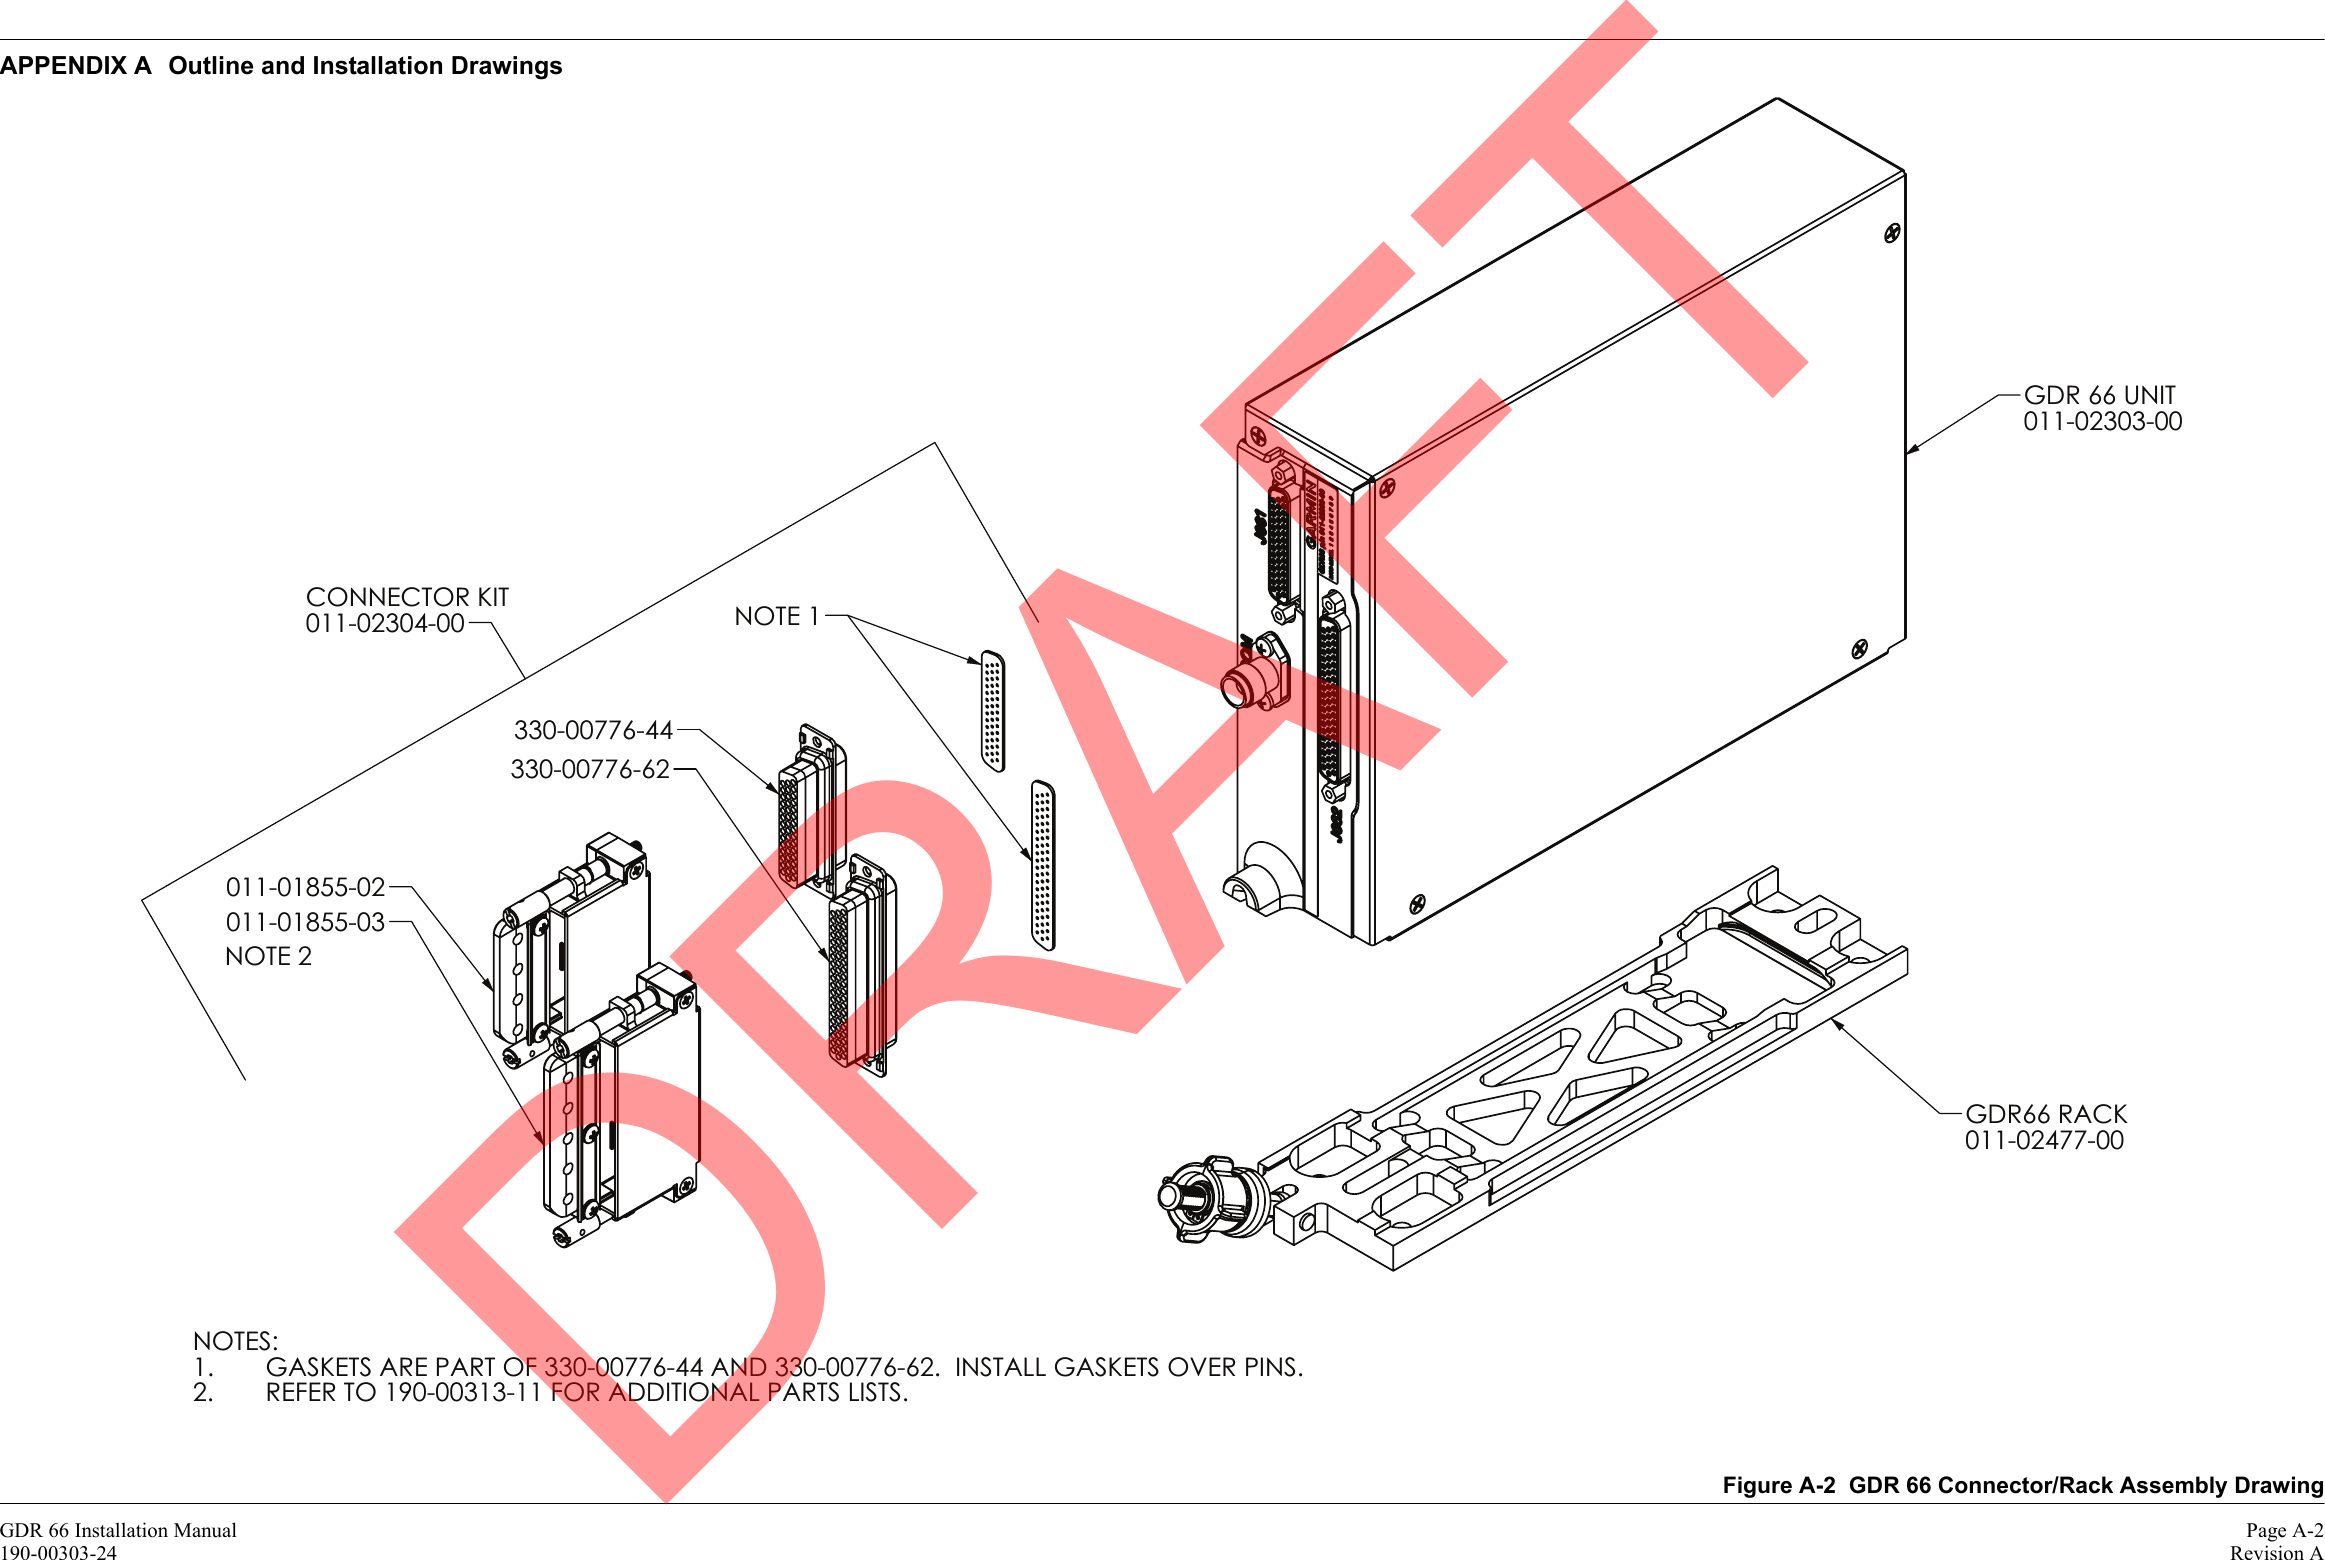 GDR 66 Installation Manual Page A-2190-00303-24 Revision AAPPENDIX A Outline and Installation DrawingsFigure A-2  GDR 66 Connector/Rack Assembly Drawing011-02477-00330-00776-442.GDR 66 UNIT011-02303-00GDR66 RACK011-02304-00011-01855-02011-01855-03330-00776-62NOTE 1CONNECTOR KITNOTES:GASKETS ARE PART OF 330-00776-44 AND 330-00776-62.  INSTALL GASKETS OVER PINS.1.REFER TO 190-00313-11 FOR ADDITIONAL PARTS LISTS.NOTE 2DRAFT